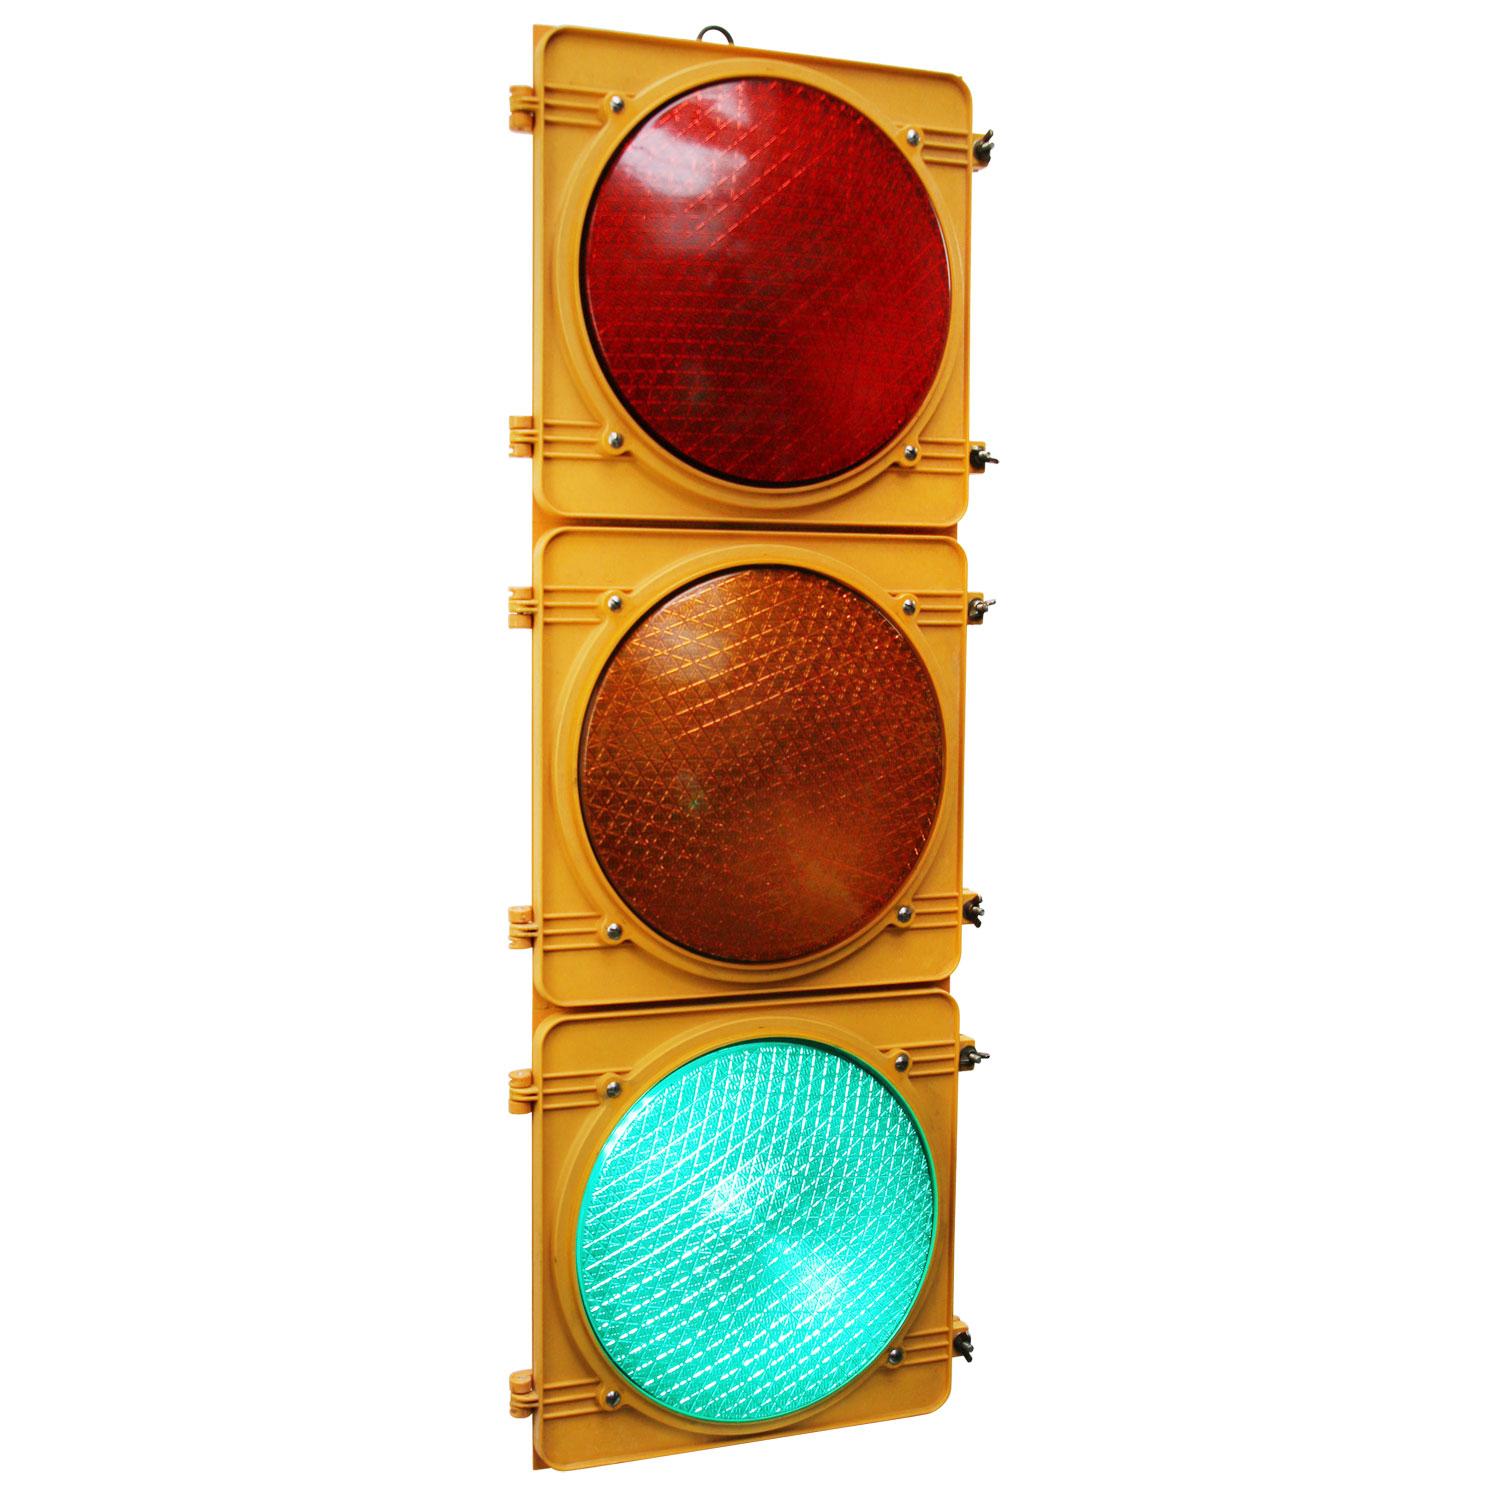 American traffic Light
Yellow plastic cover.
3 on / off switches. 

Also suitable as wall light.

Weight: 8.50 kg / 18.7 lb

LED 110 volt (including 110 to 220 transformer for 220 volt countries)

Priced per individual item. All lamps have